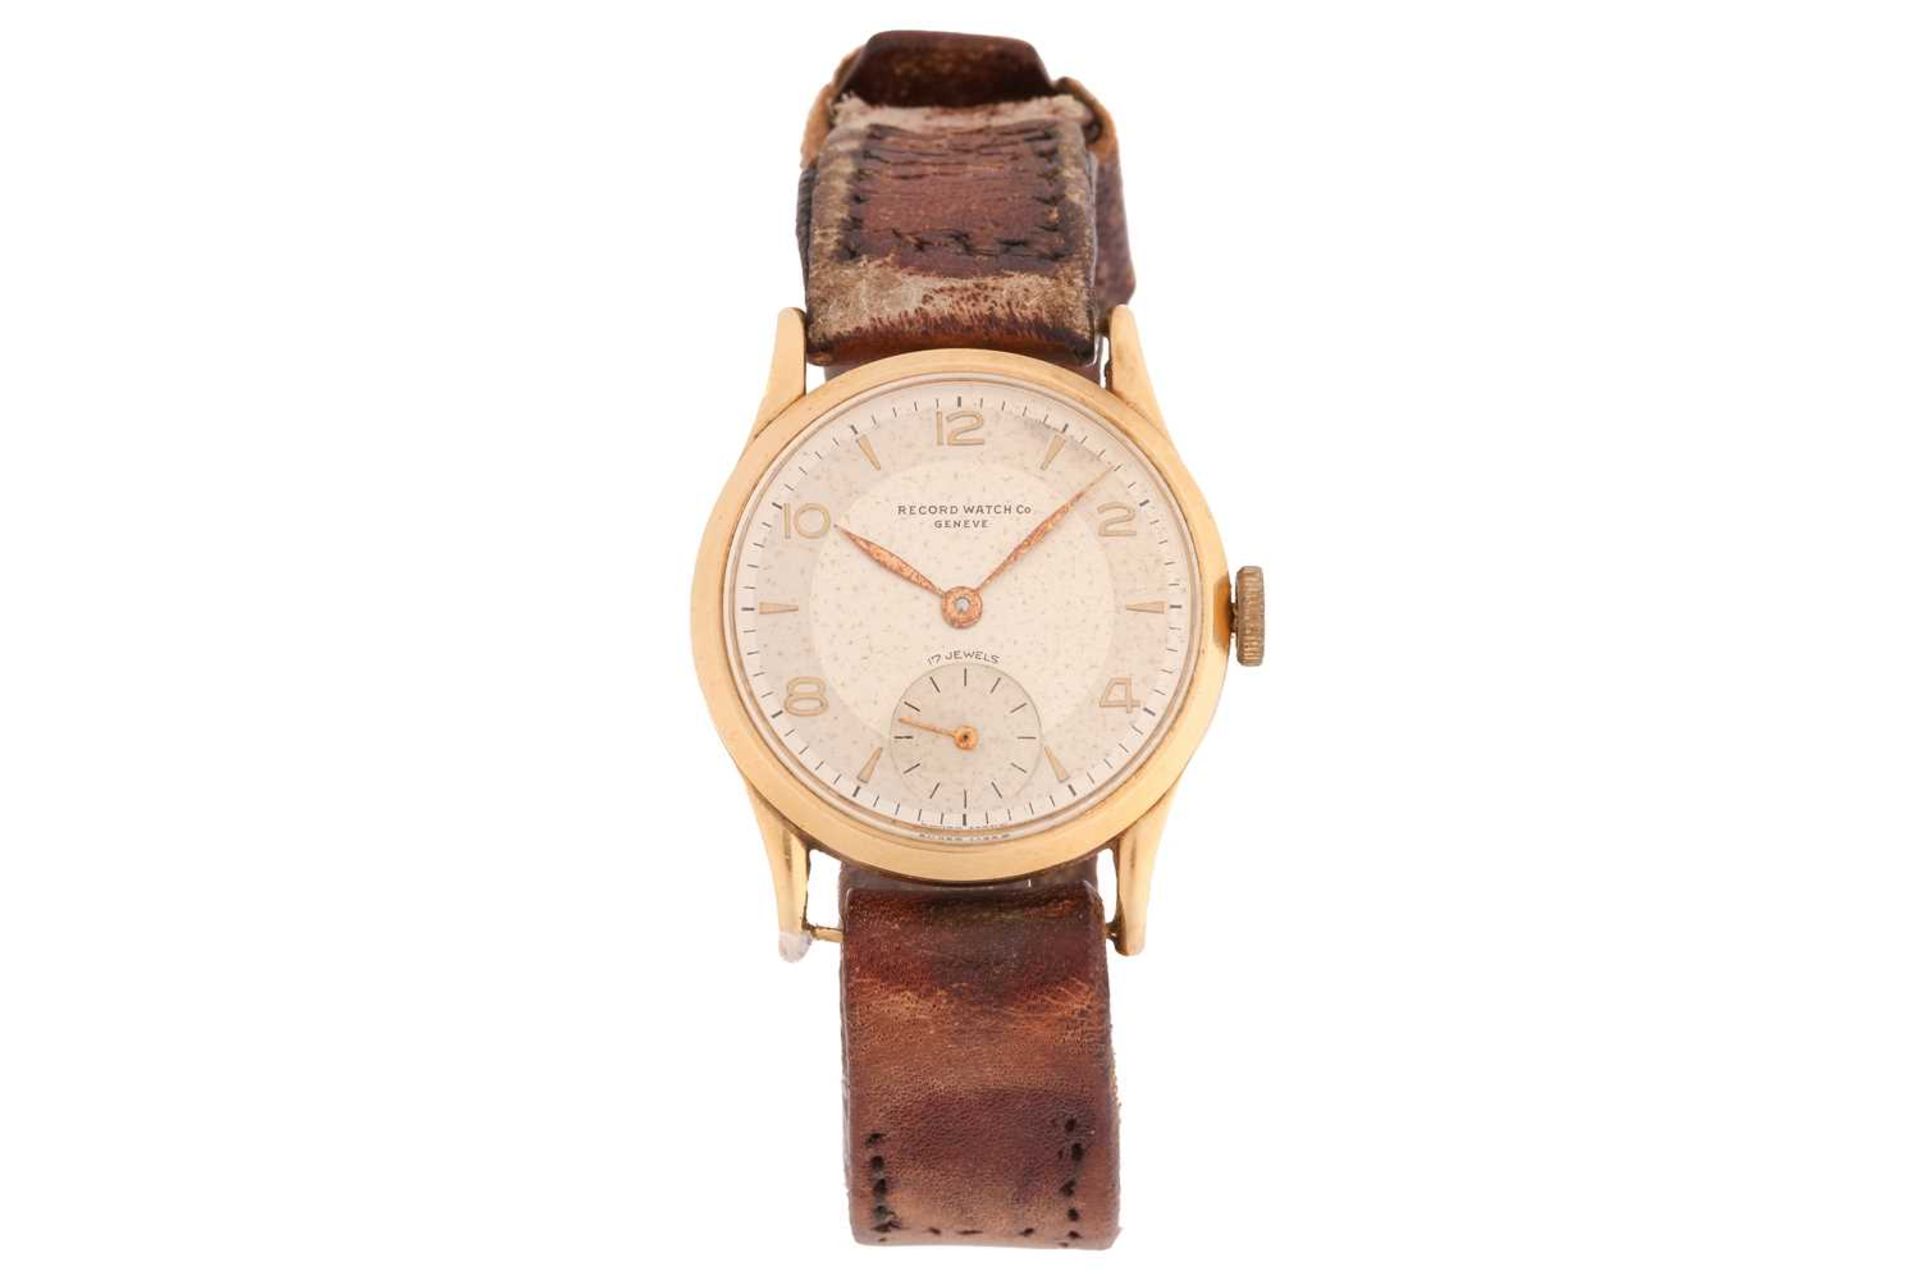 A Record Watch Co. Geneve 18ct yellow gold wristwatch, the silvered dial with gilt numerals and